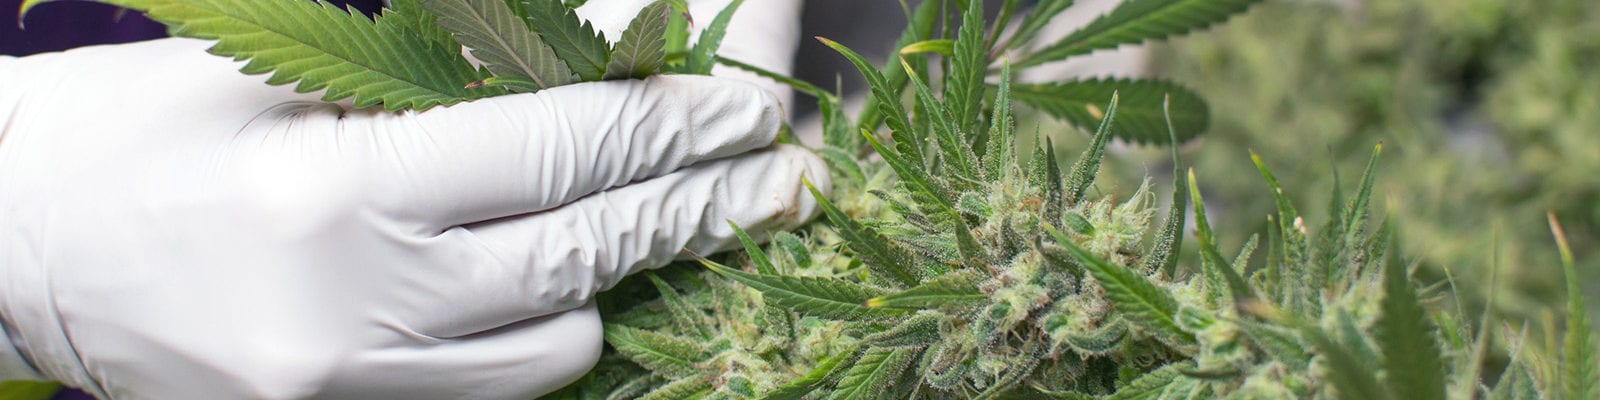 A cannabis worker plucks long leaves off recently harvested cannabis buds.